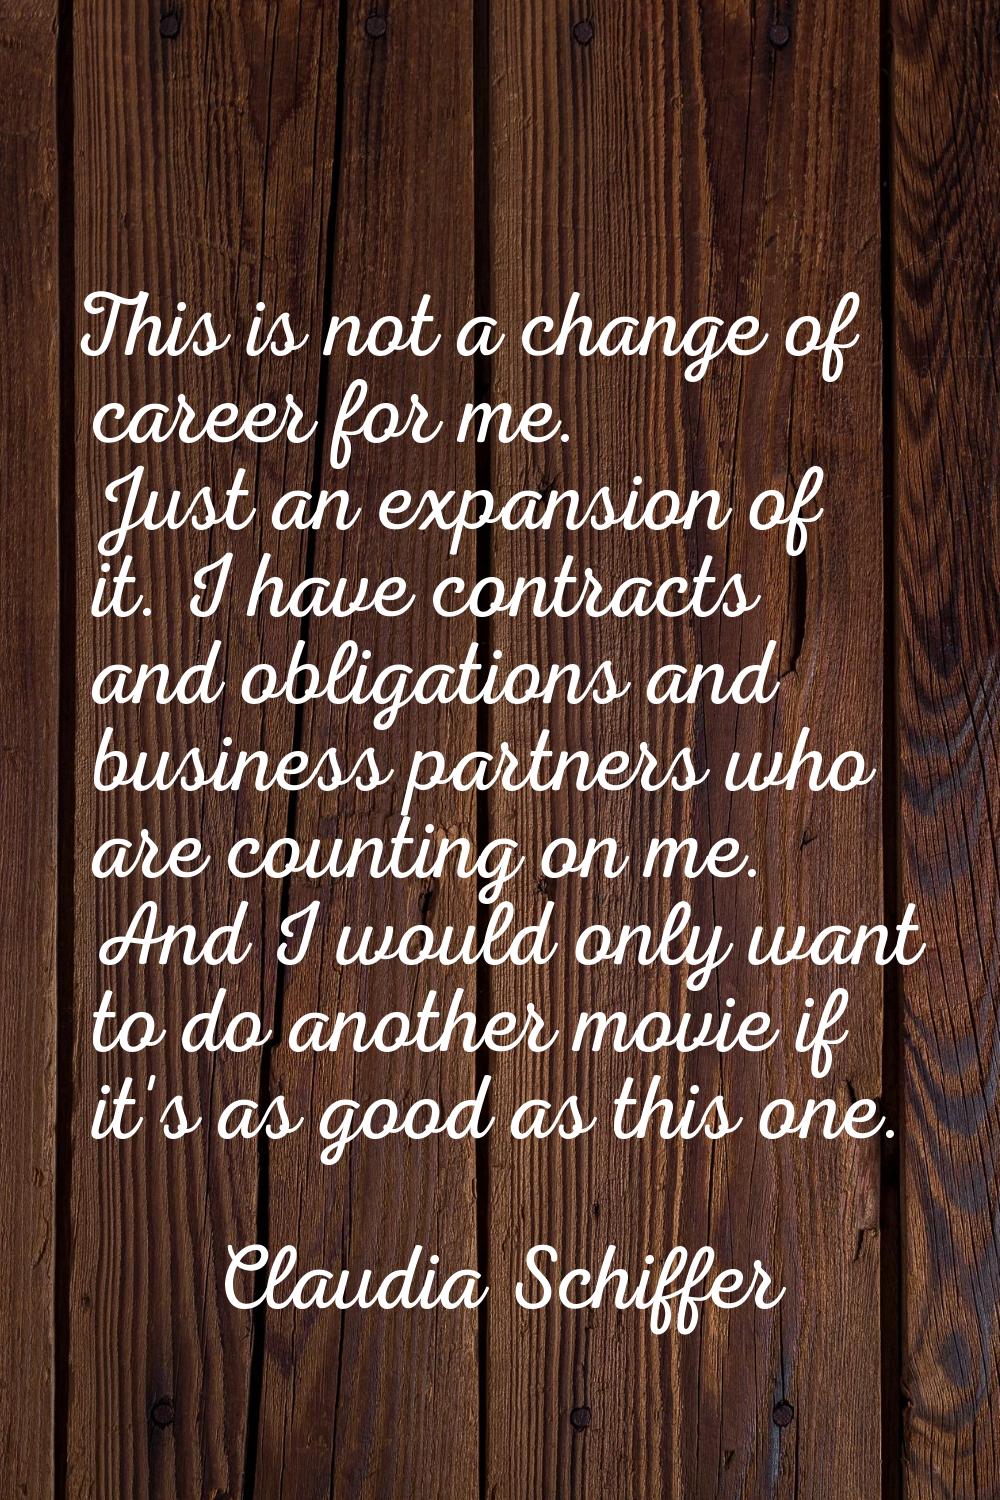 This is not a change of career for me. Just an expansion of it. I have contracts and obligations an